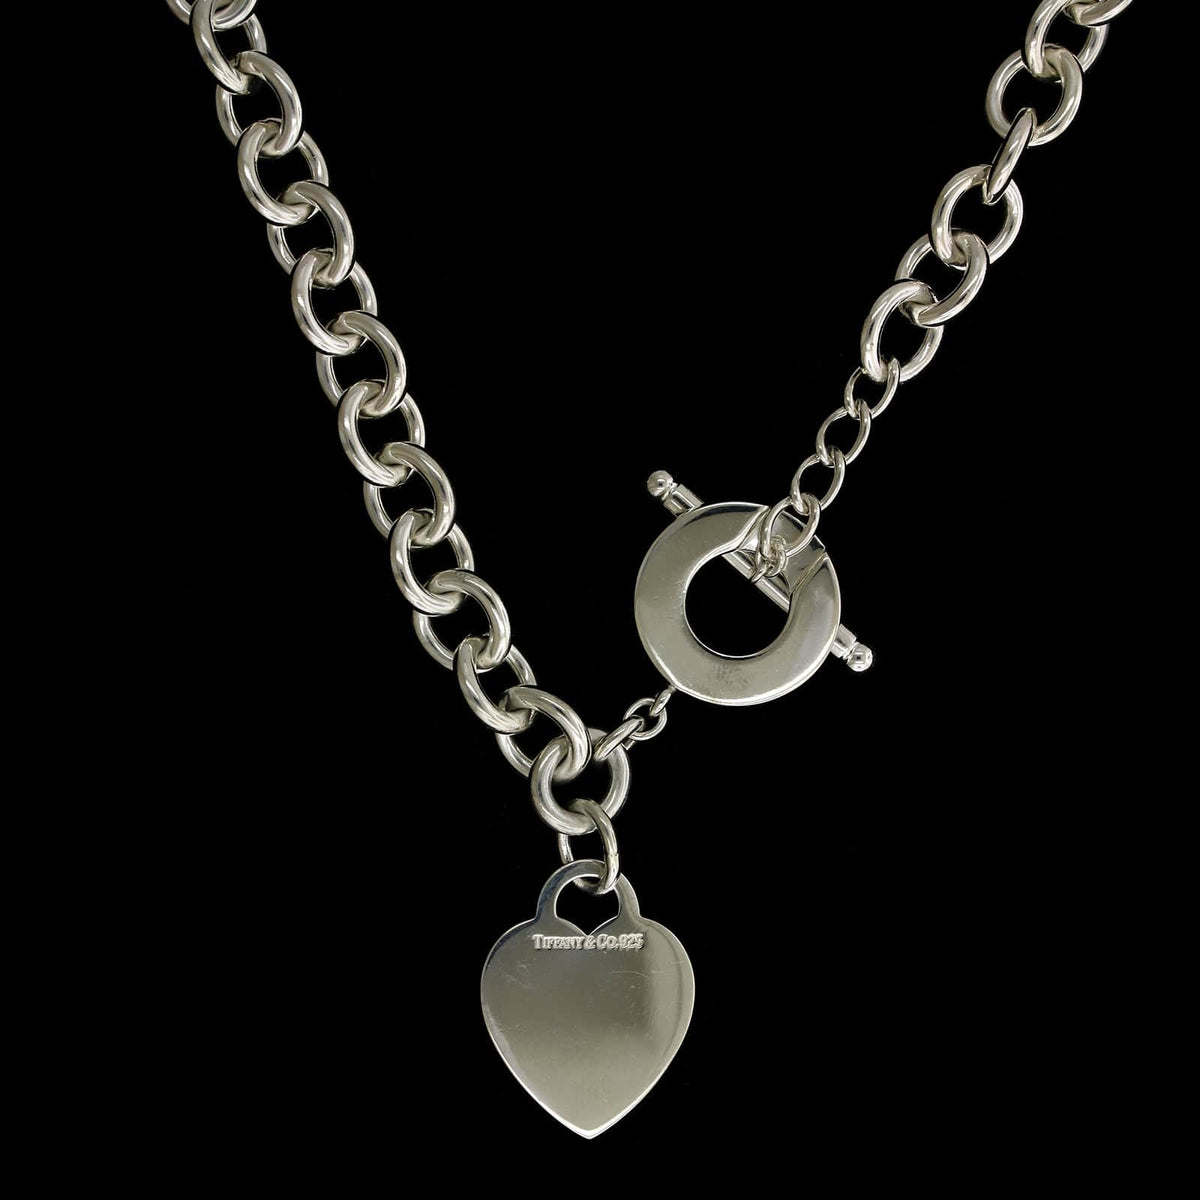 Vintage Tiffany & Co Heart Tag Toggle Necklace Sterling Silver - Etsy